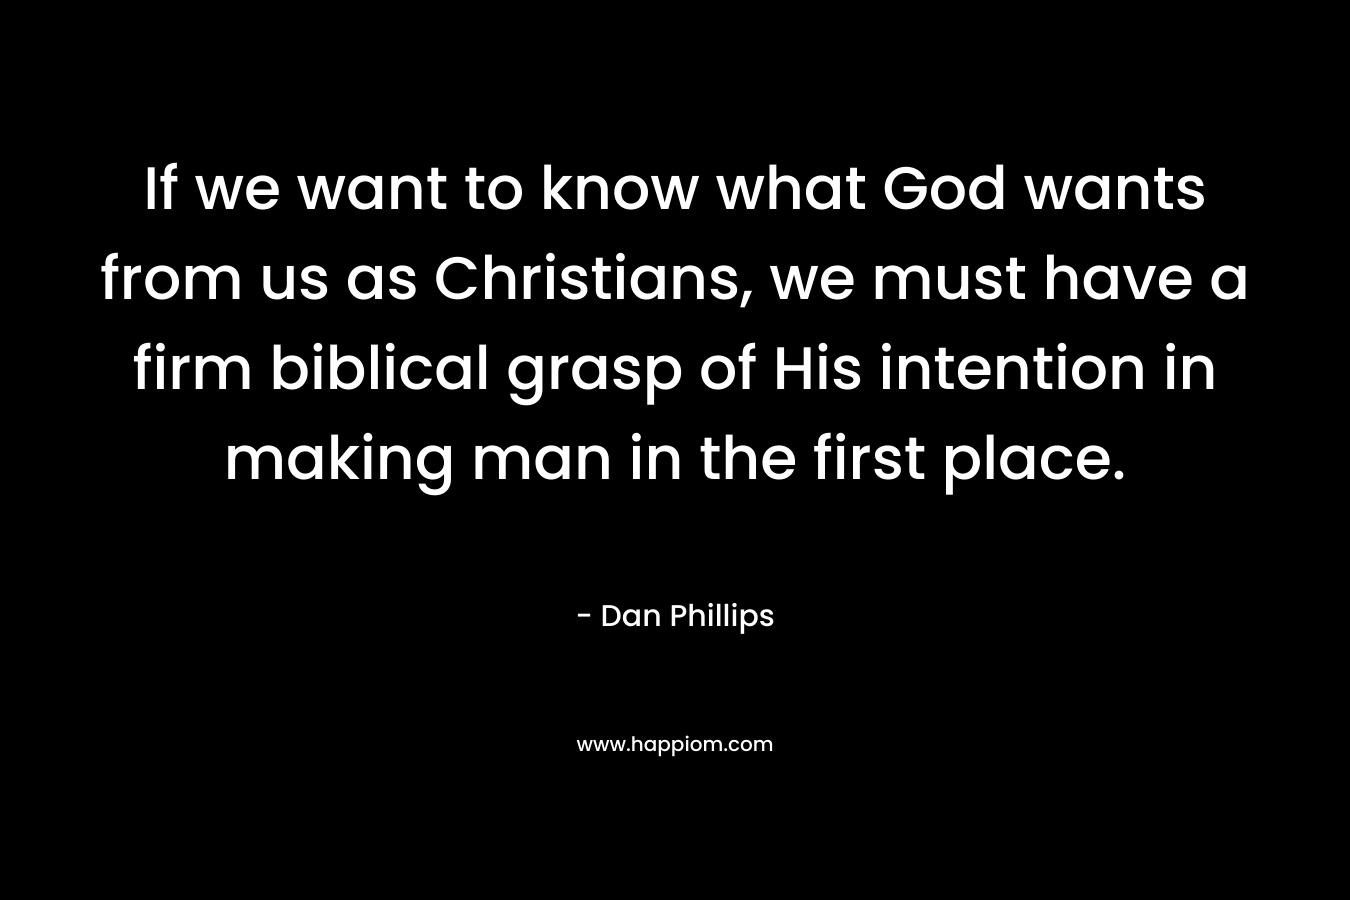 If we want to know what God wants from us as Christians, we must have a firm biblical grasp of His intention in making man in the first place.